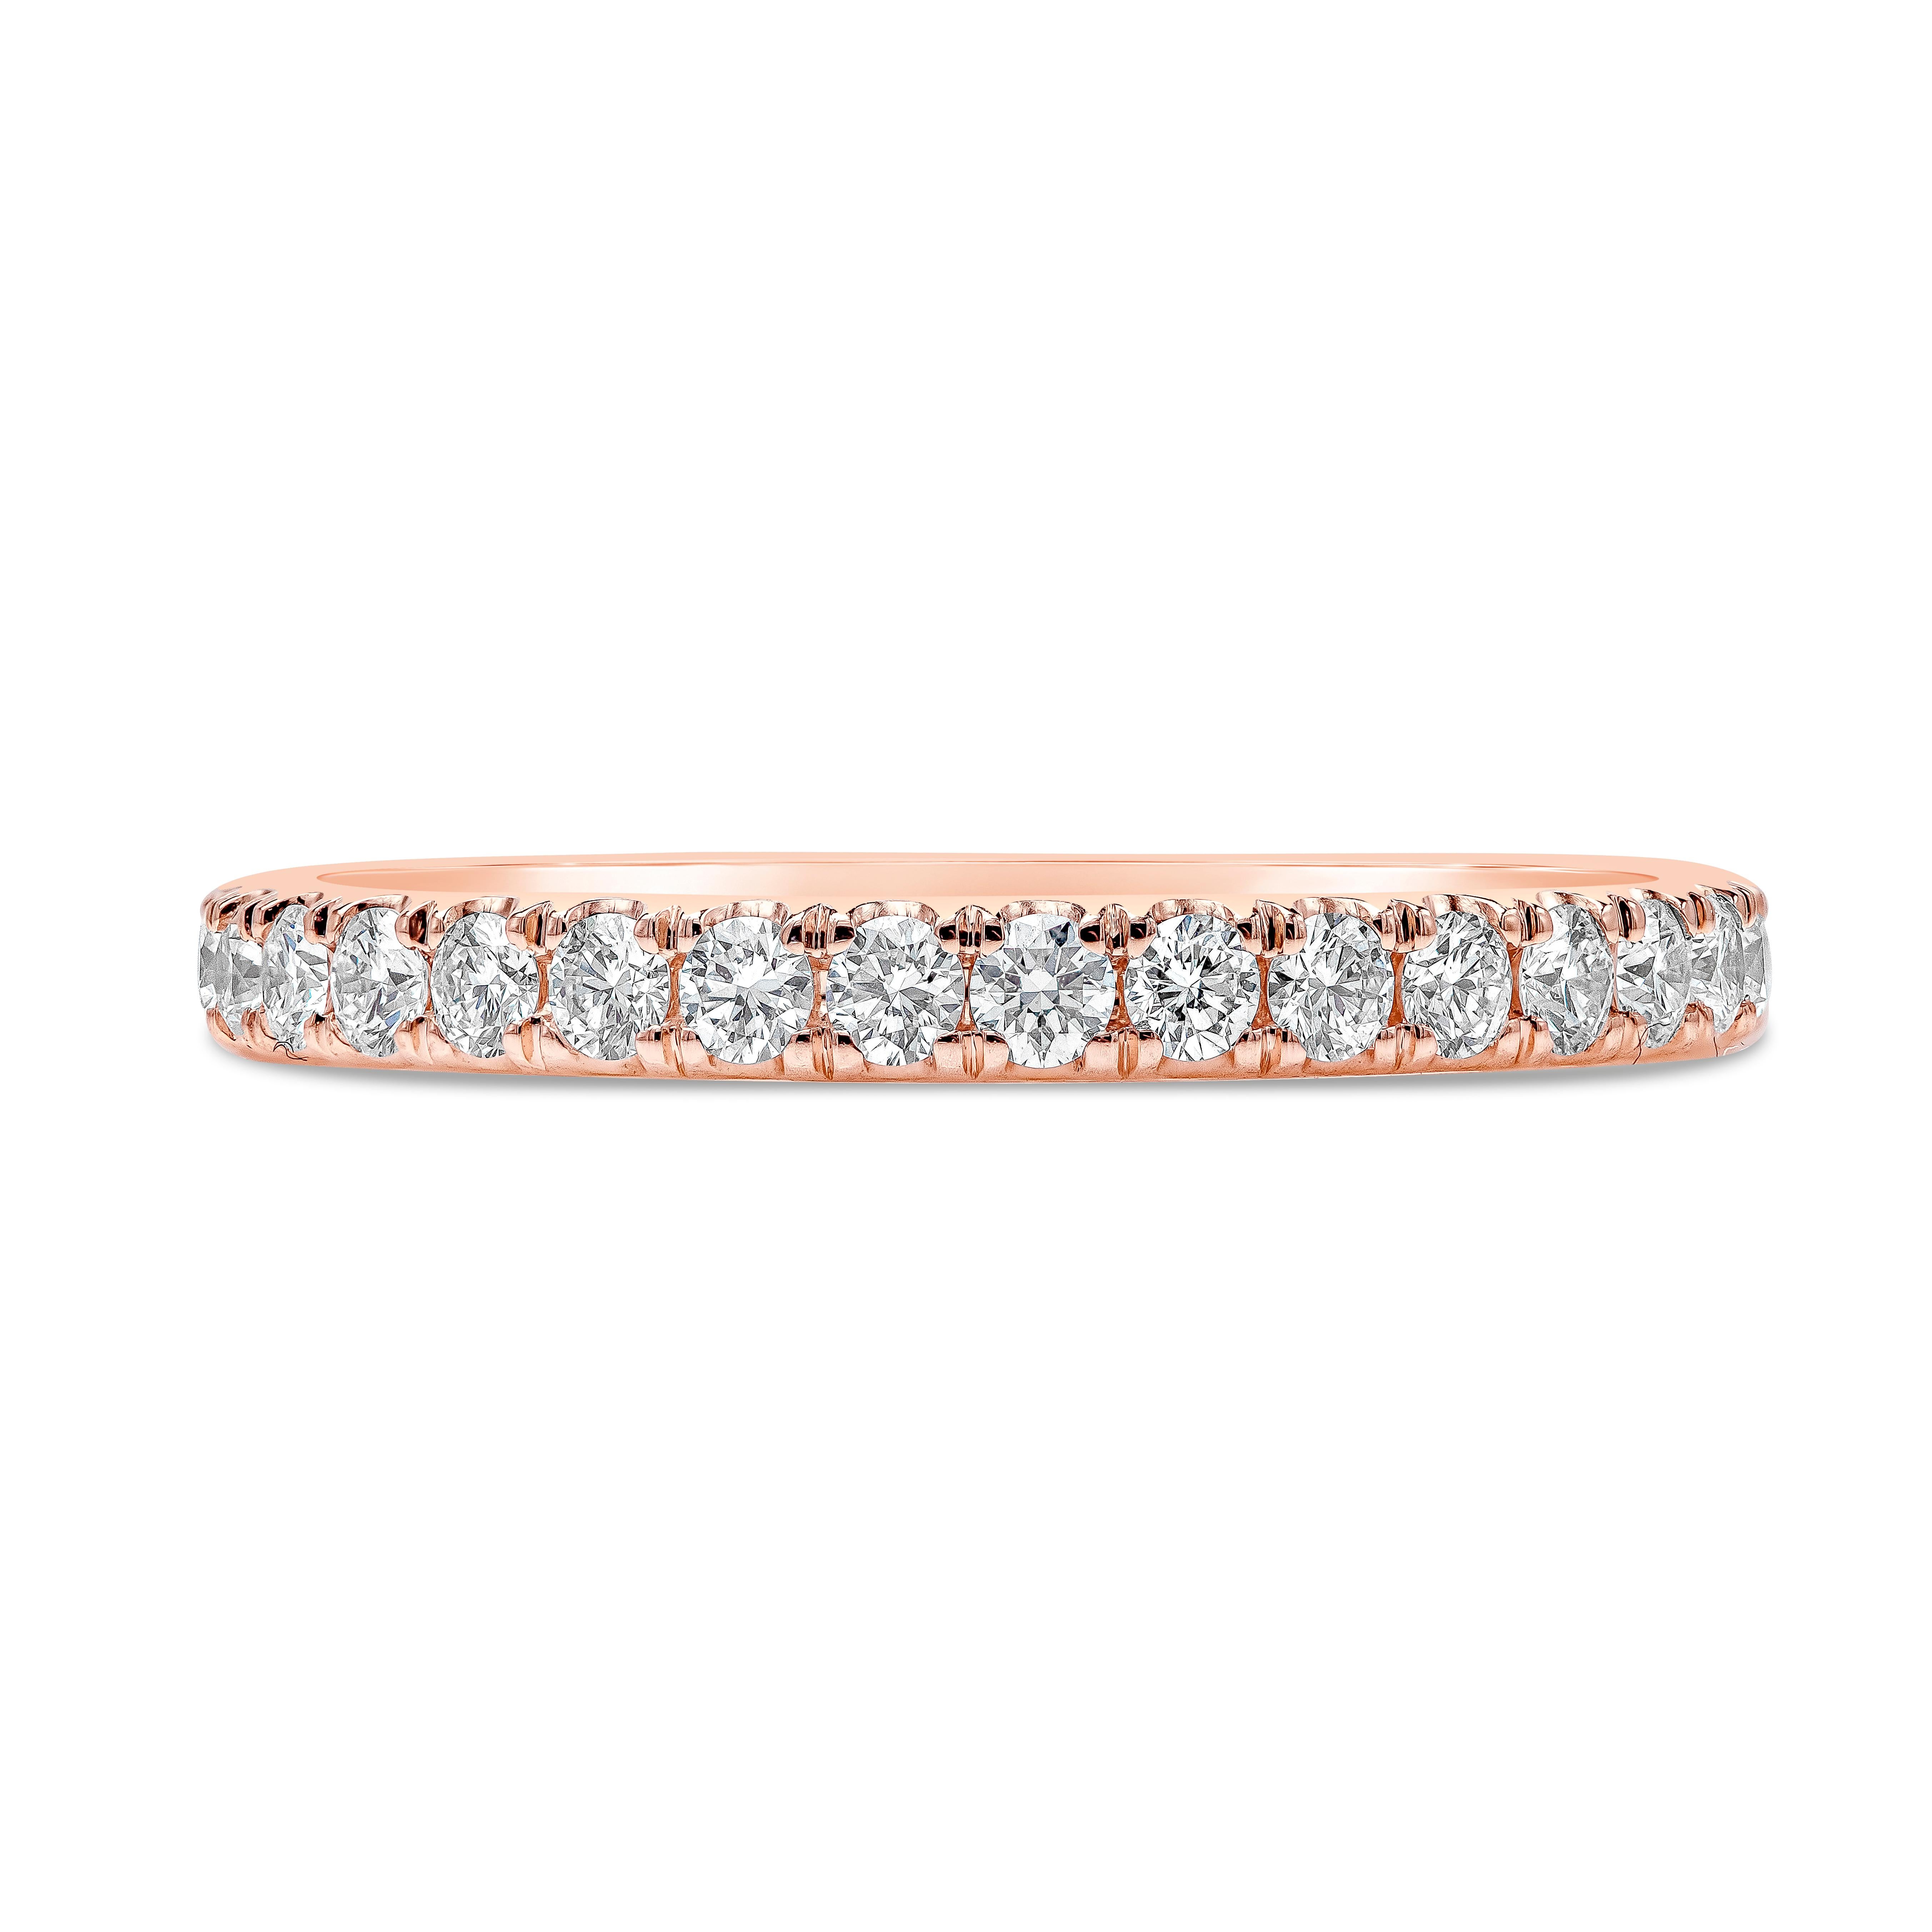 A timeless eternity wedding band style, showcasing a row of round brilliant cut diamonds weighing 0.55 carats total, set in a scalloped-pave setting of 18K rose gold. Size 6 US, resizable upon request.

Roman Malakov is a custom house, specializing